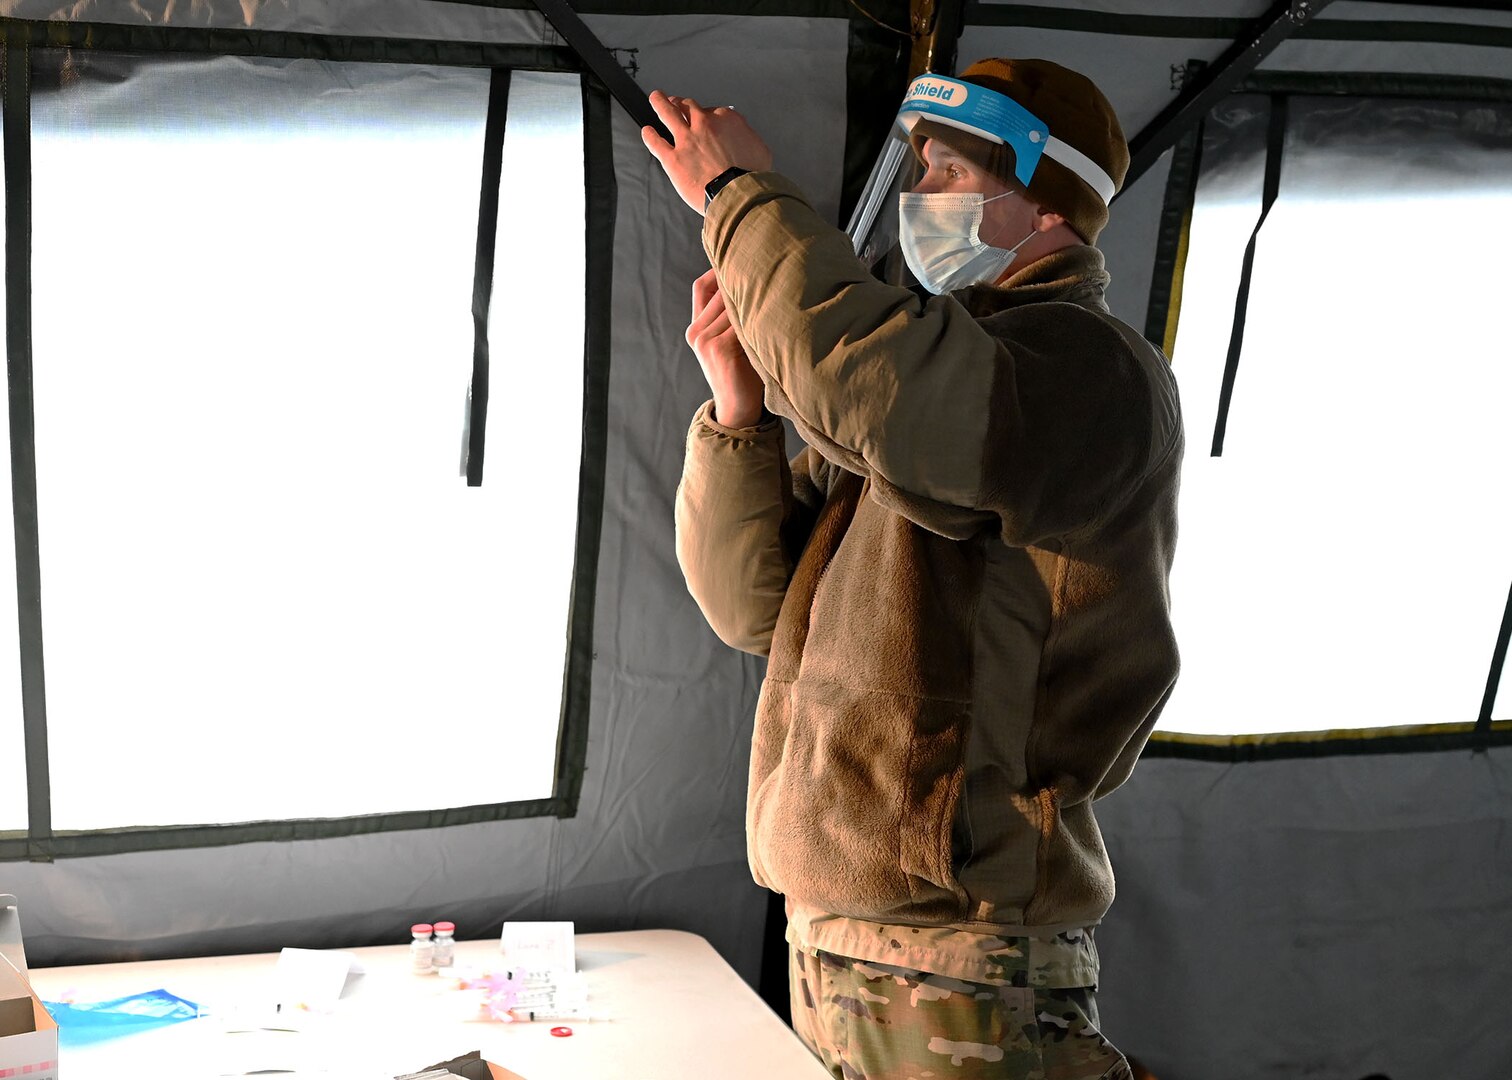 Staff Sgt. Mark Kucal, a medical technician with the 157th Air Refueling Wing, NHANG, draws Moderna COVID-19 vaccine into a syringe at a vaccination site in Lebanon, N.H. on Jan. 5, 2021.